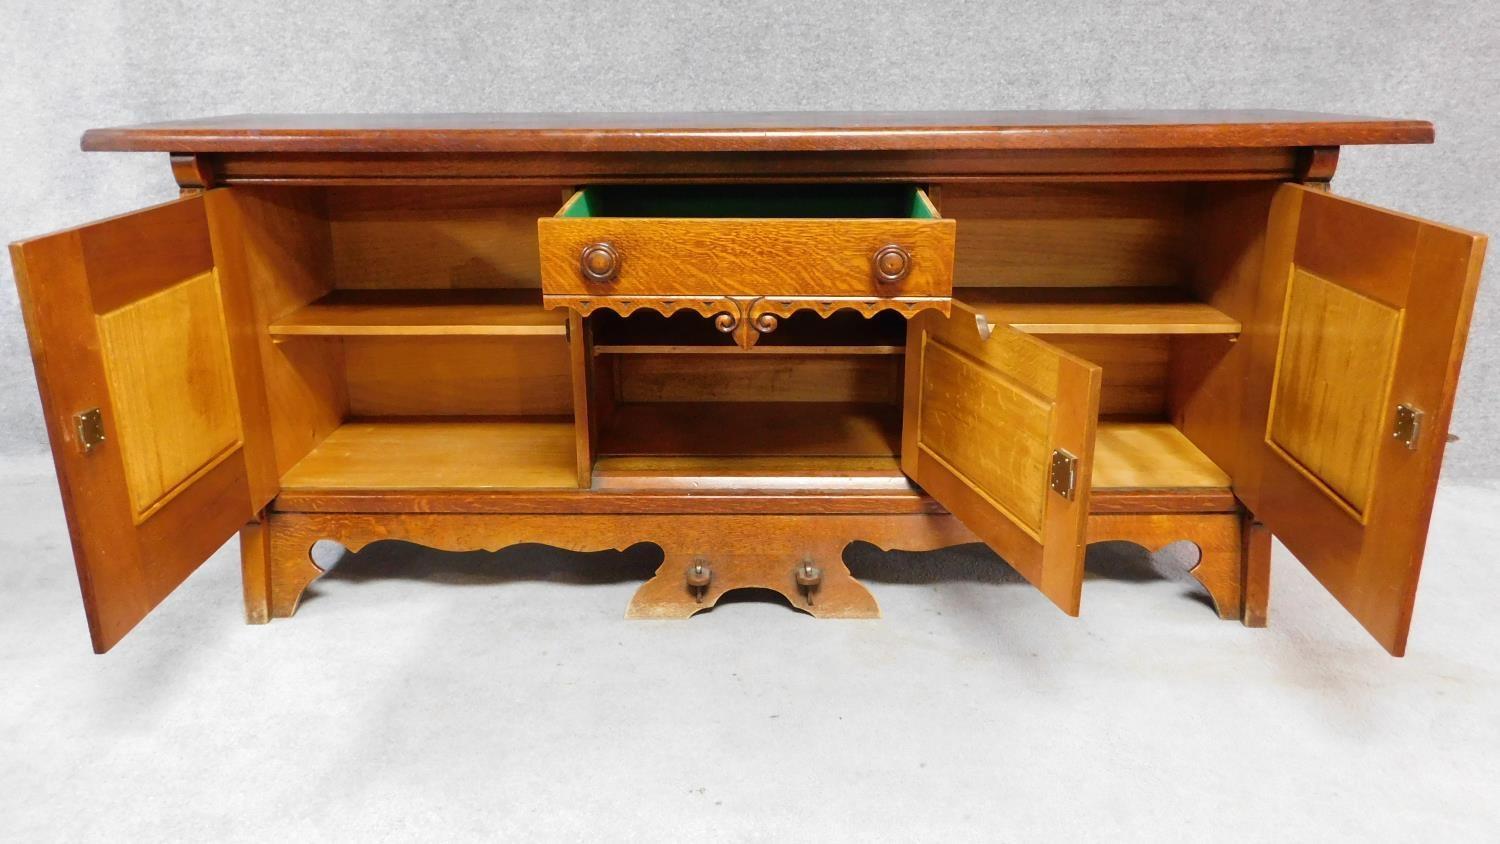 A mid 20th century Continental carved oak sideboard decorated with animal and scroll work - Image 3 of 11